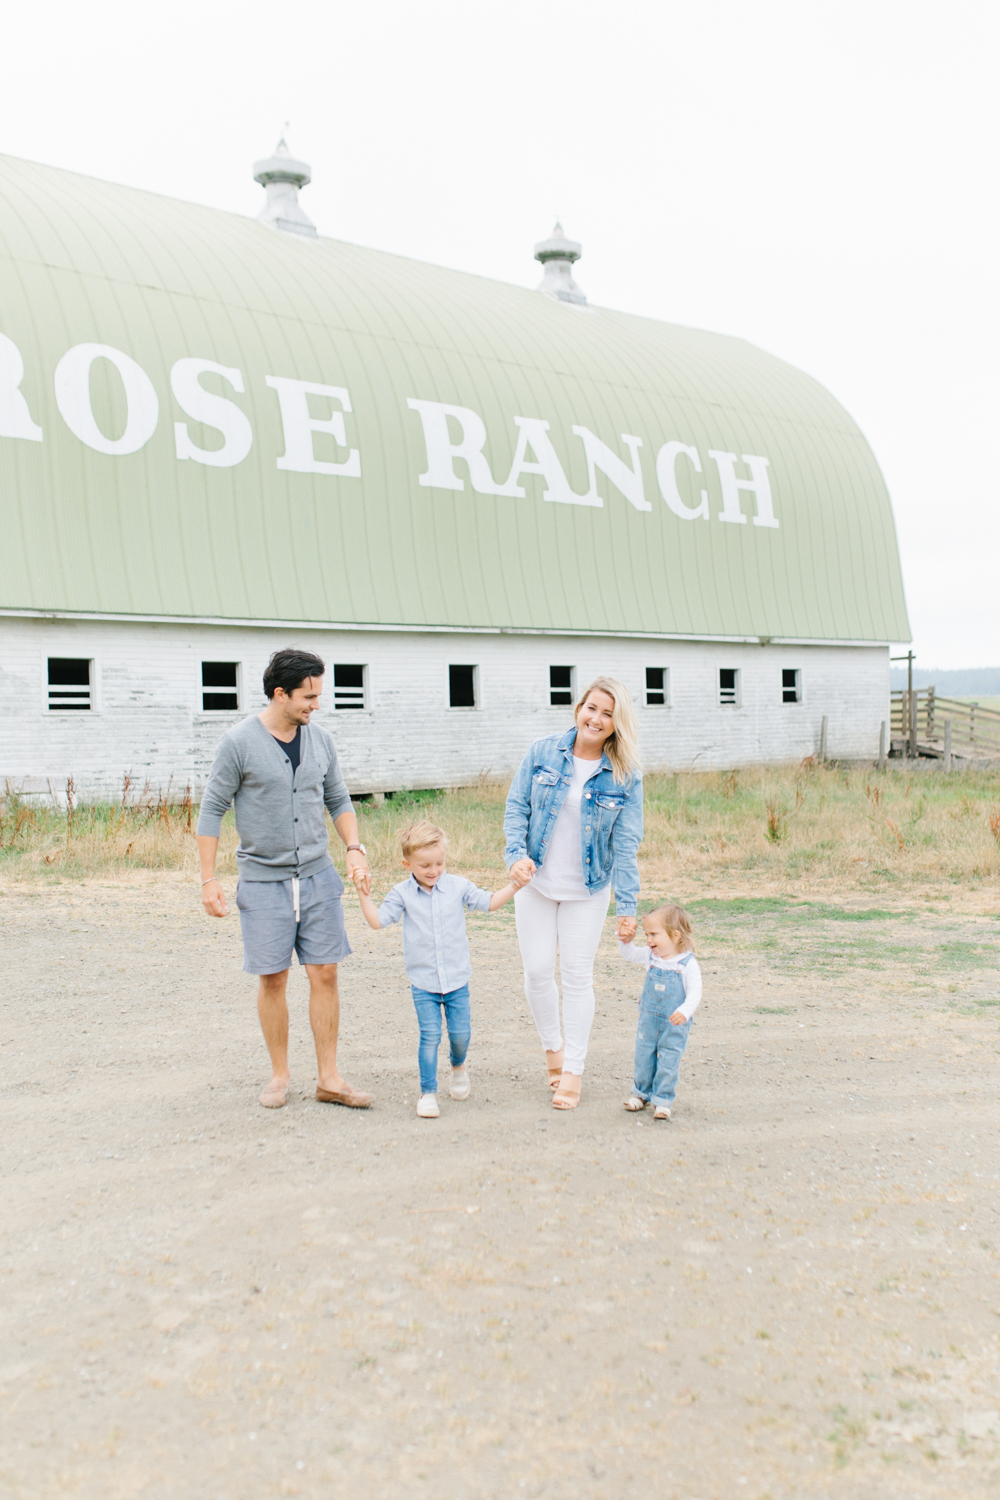 Rose Ranch Family Photo Session | Monika Hibbs Family Session in South Bend, Washington | What to Wear for Family Pictures | Pacific Northwest Family Session with Emma Rose Company-57.jpg